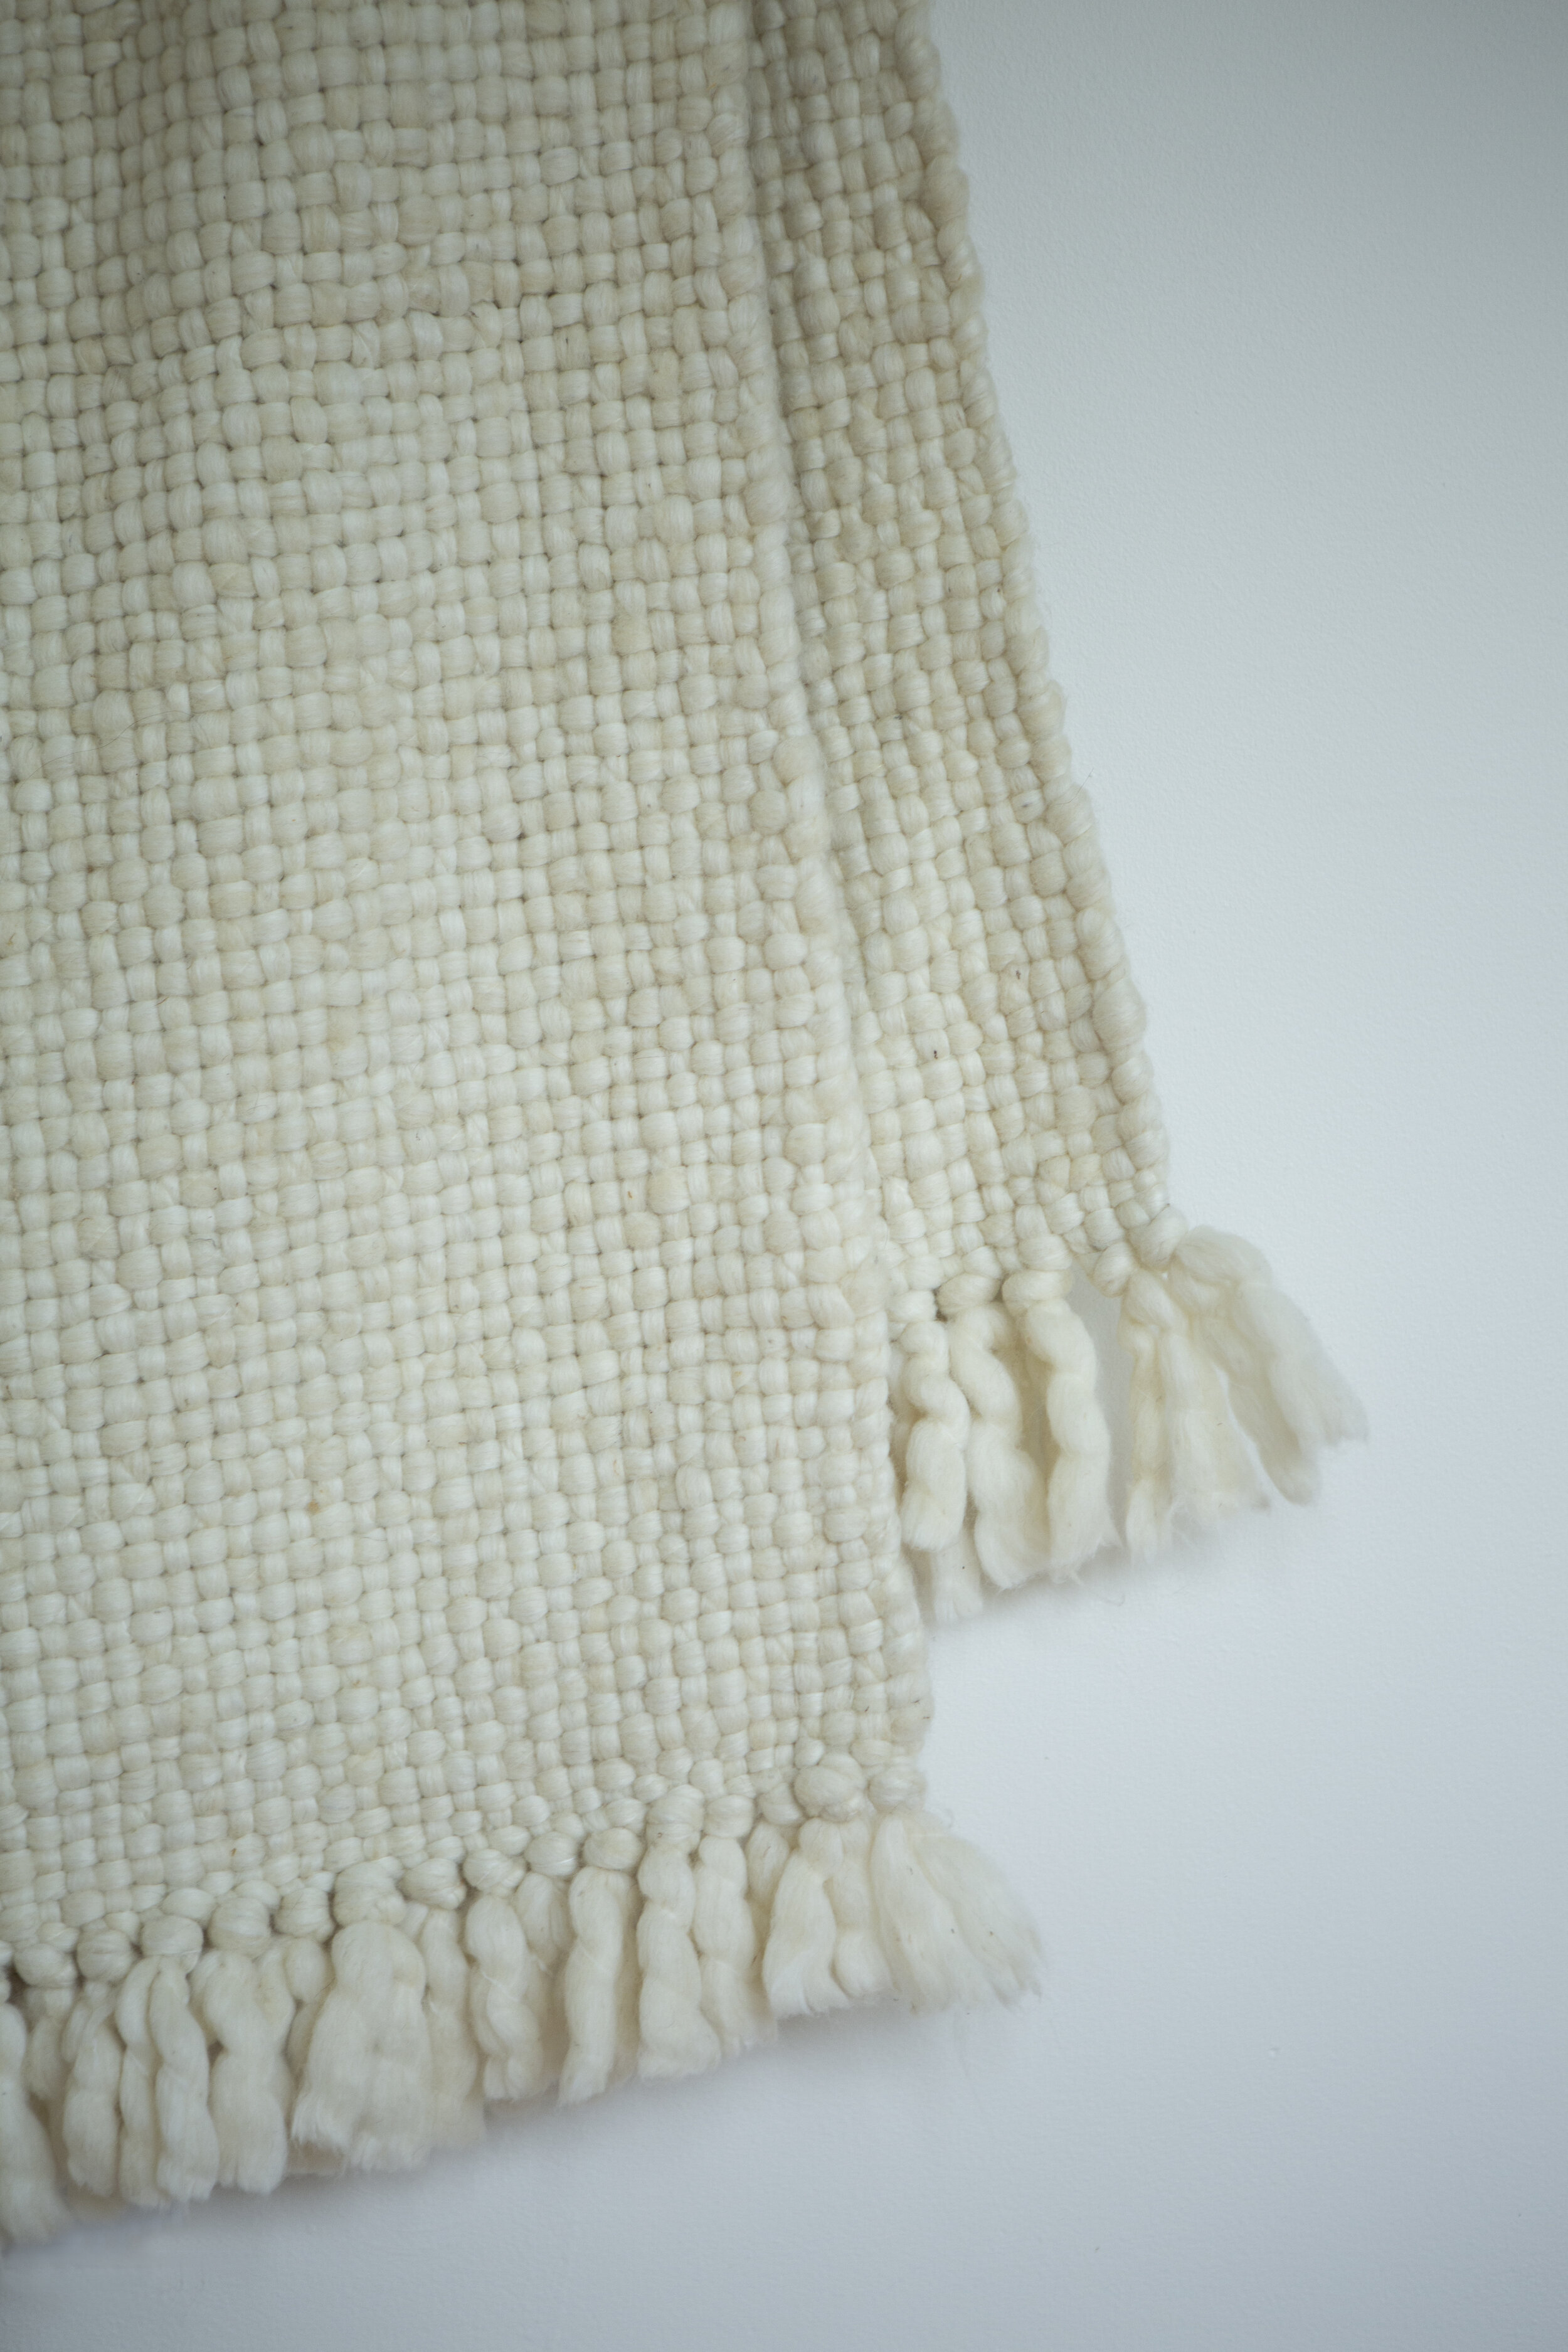 Hand-woven blankets - not only for reneactors!